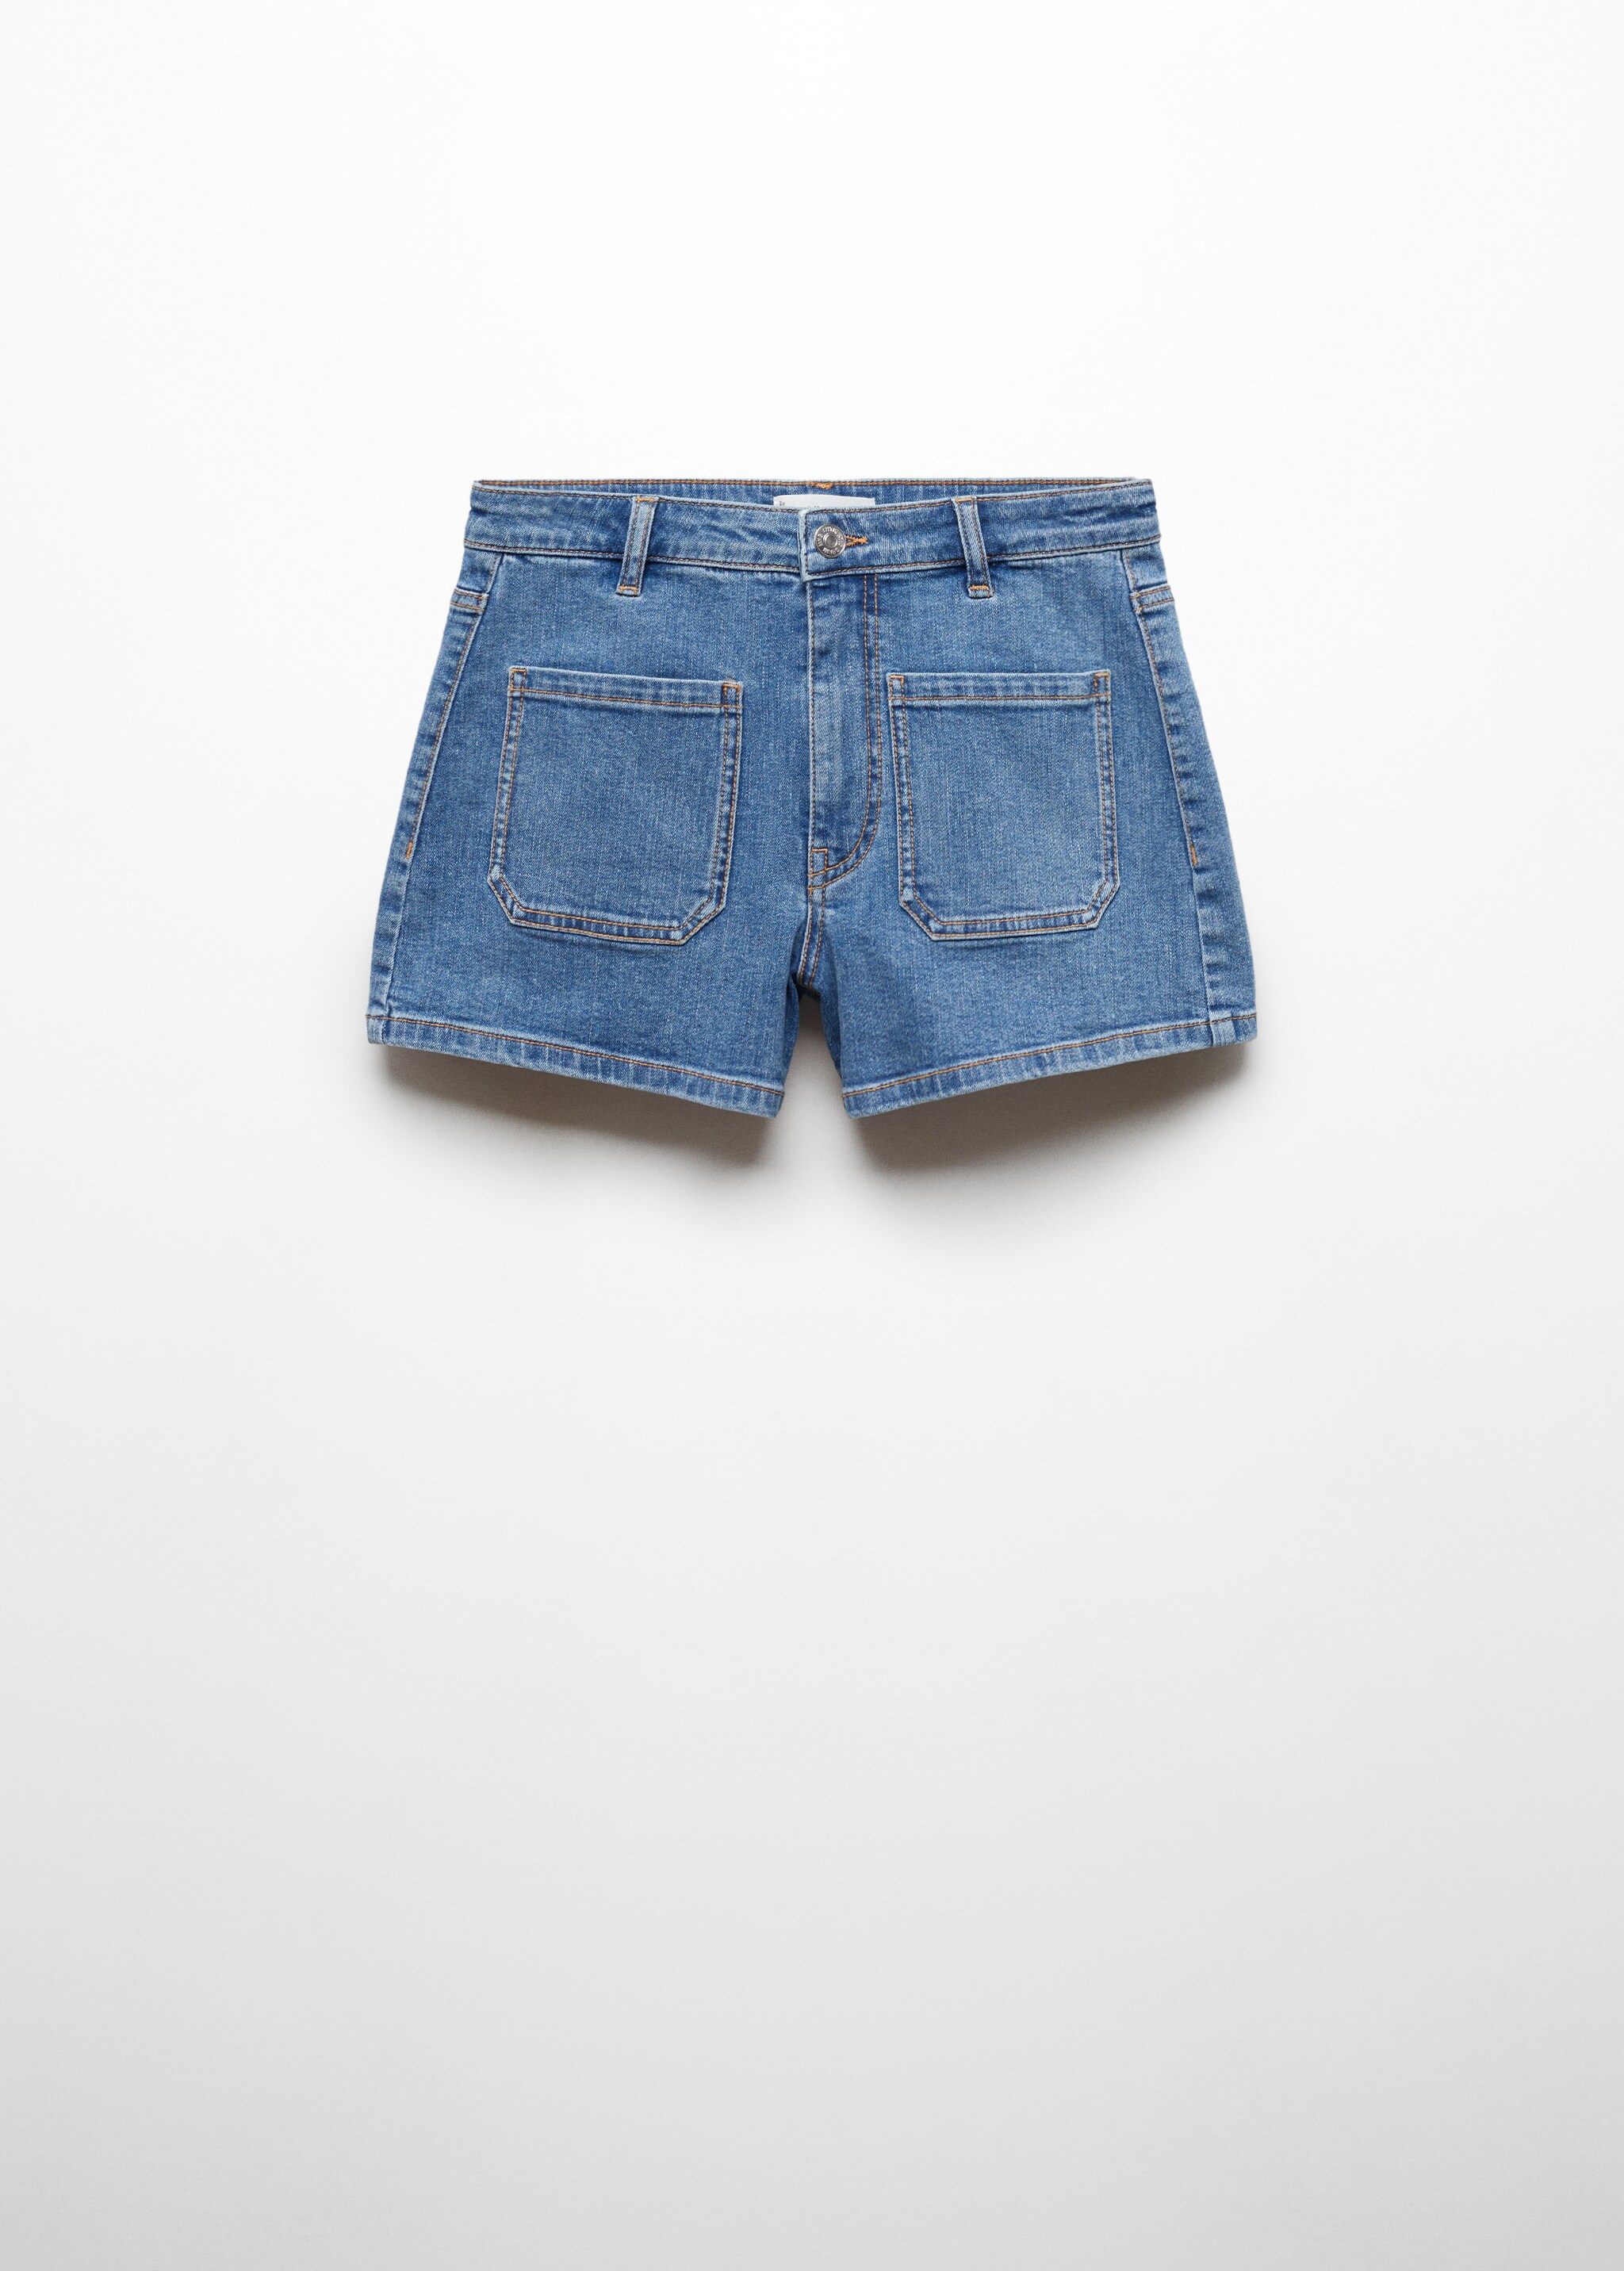 Denim shorts with pockets - Article without model